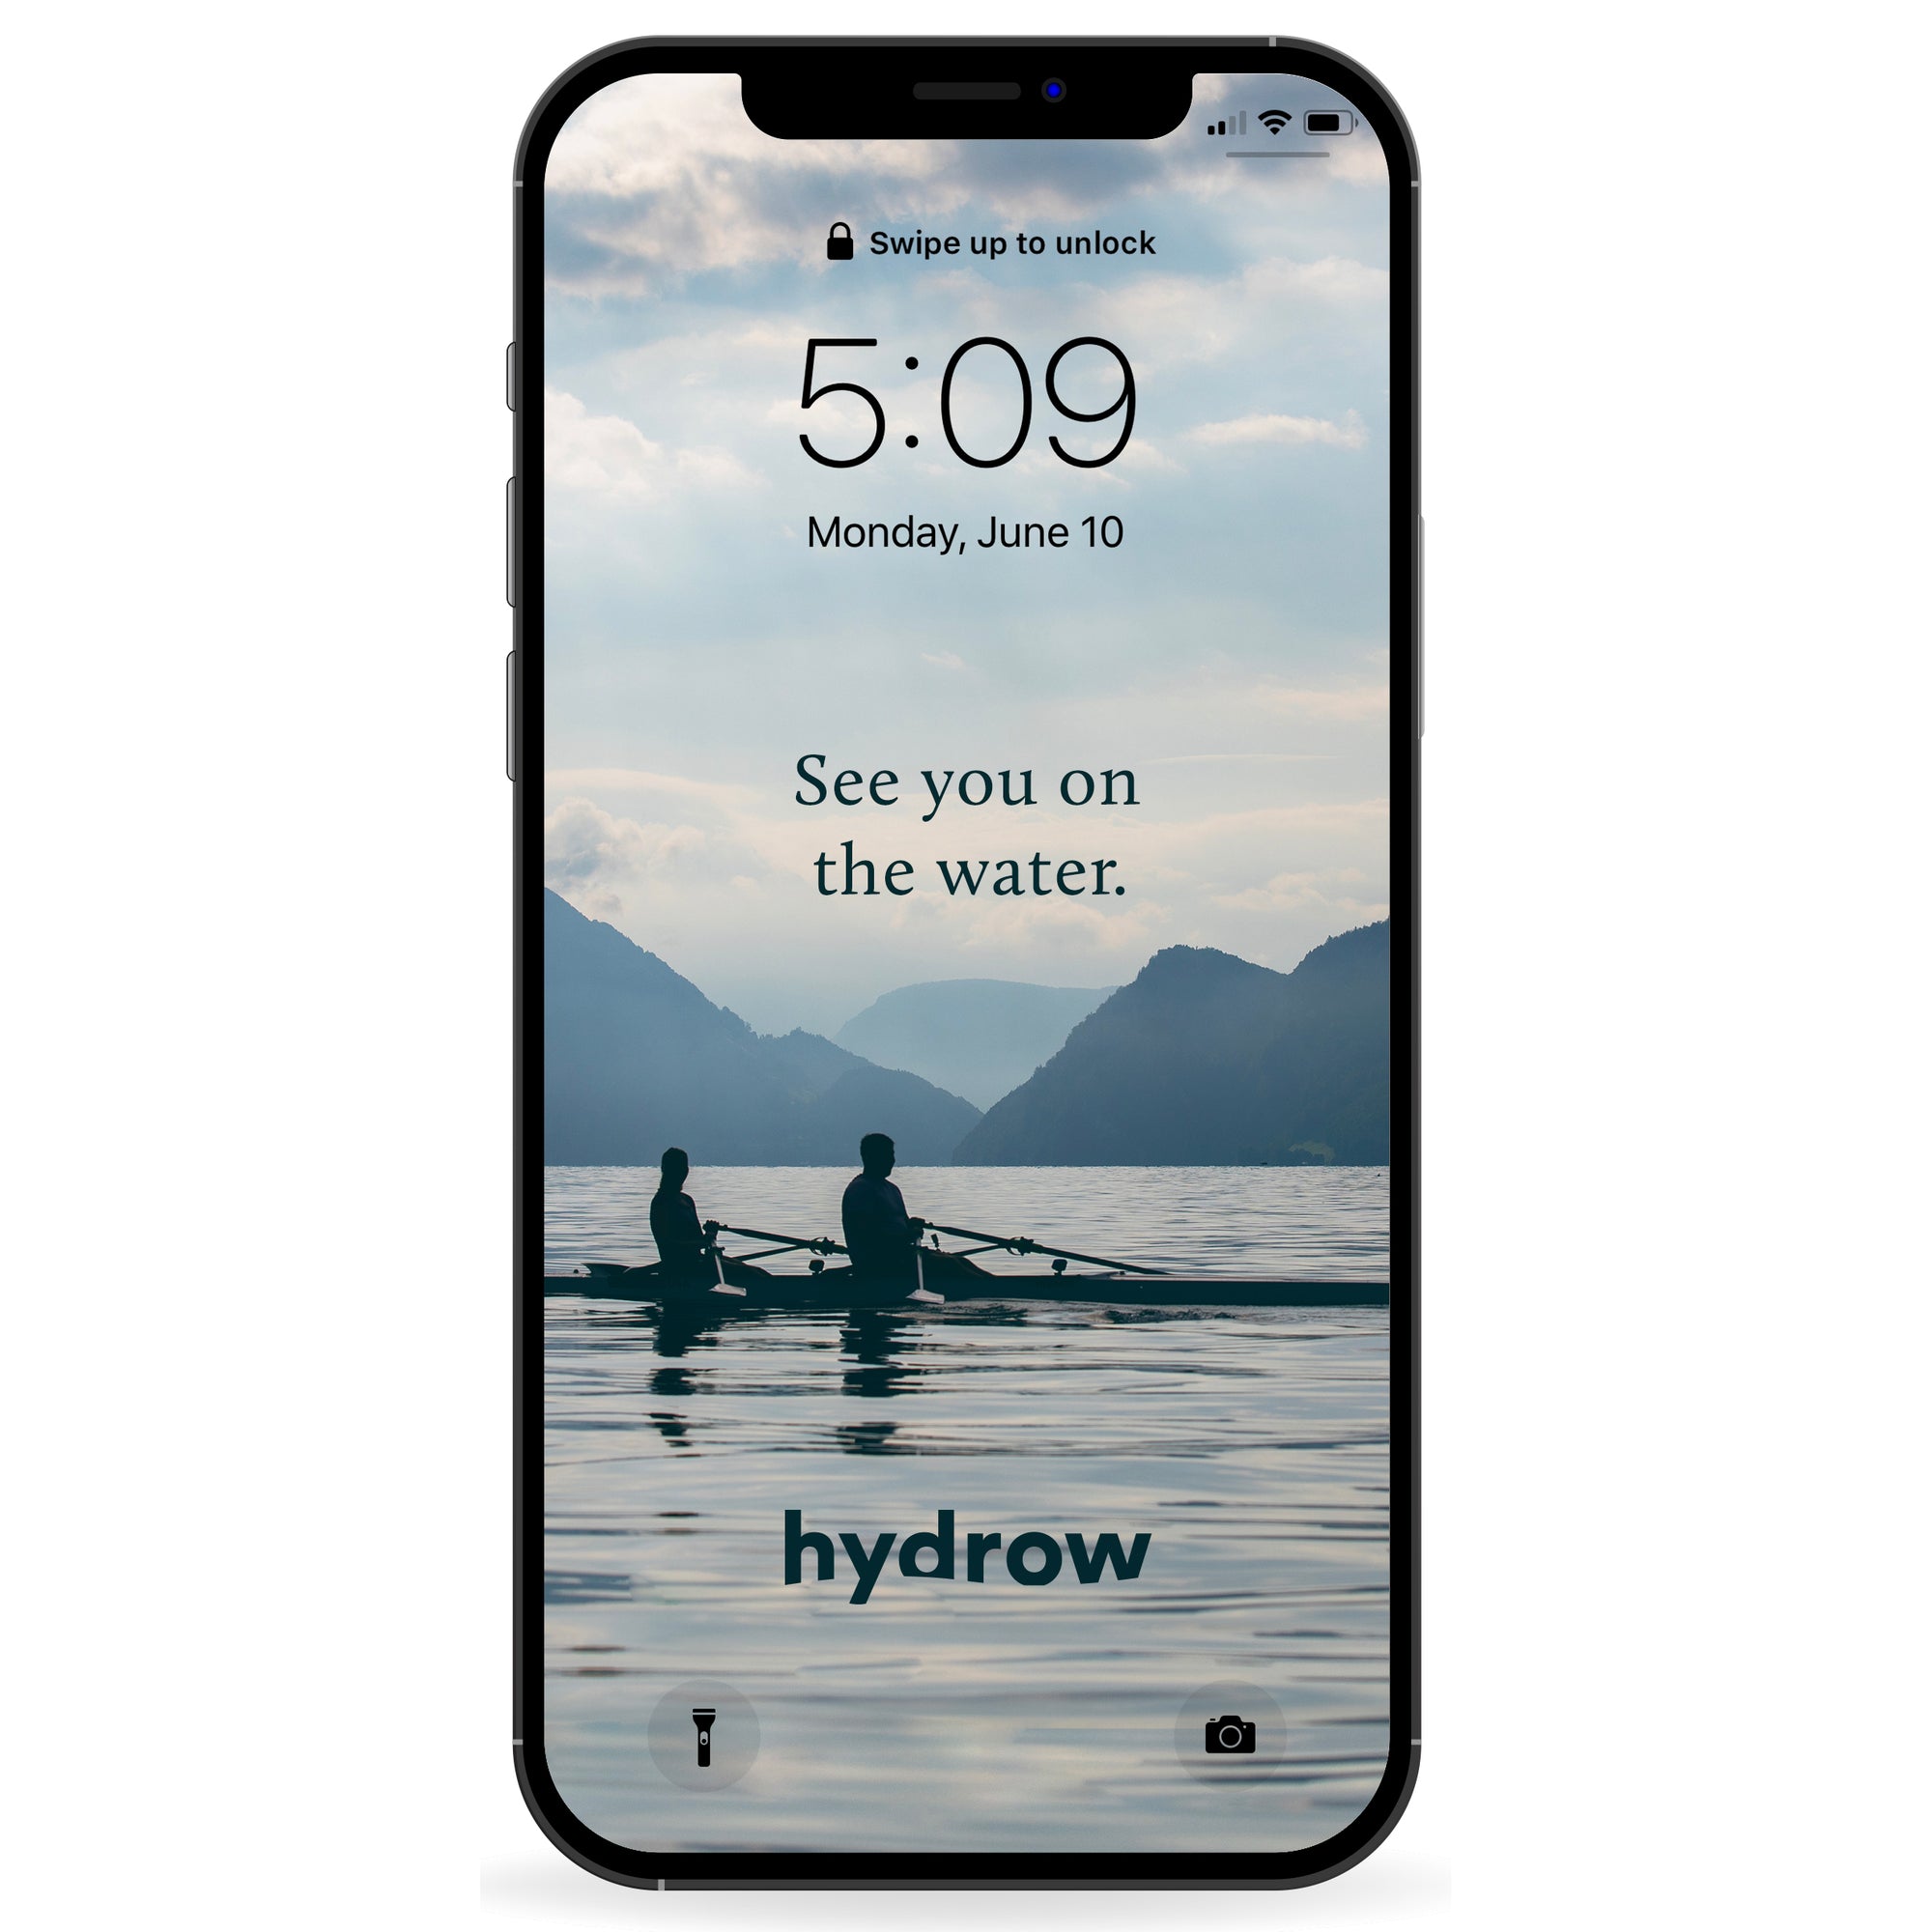 phone background featuring 2 people rowing in boat and text "See you on the water. hydrow"